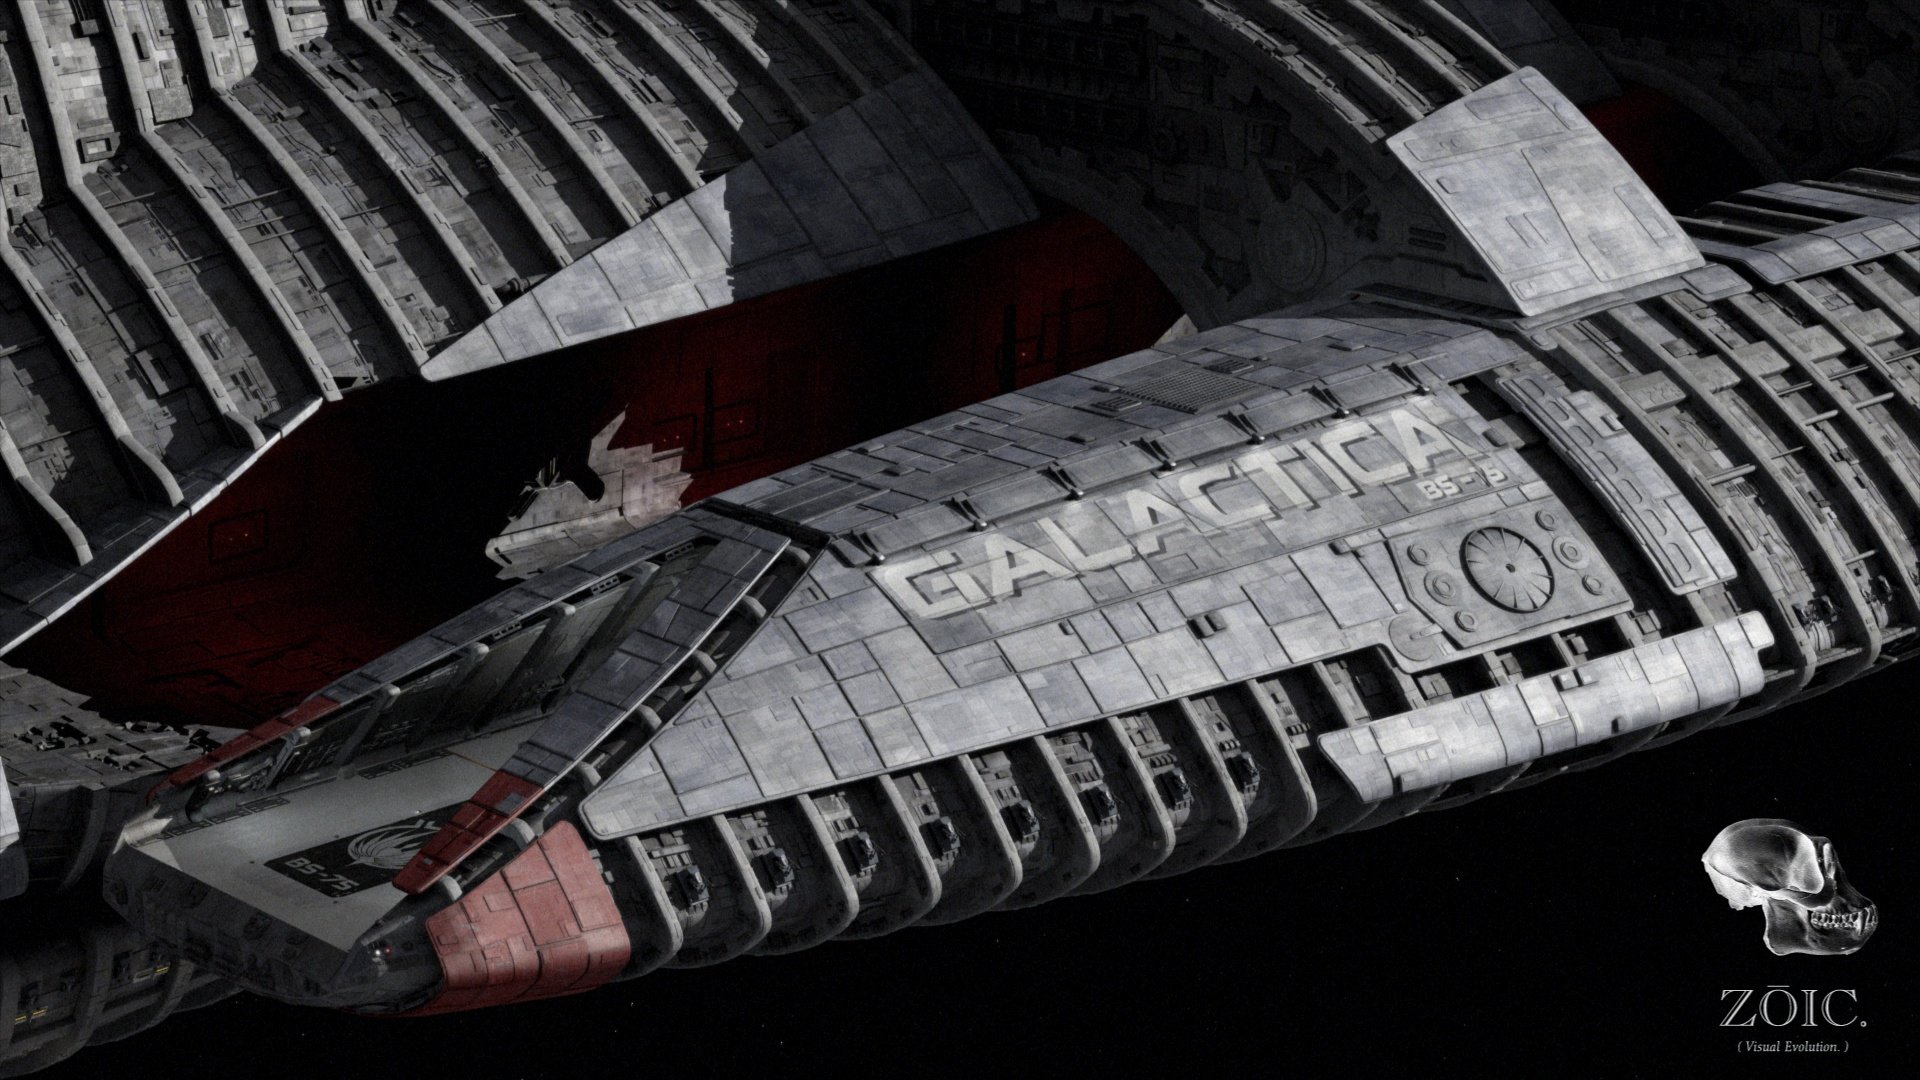 Download full hd 1080p Battlestar Galactica serial computer background ID:122777 for free